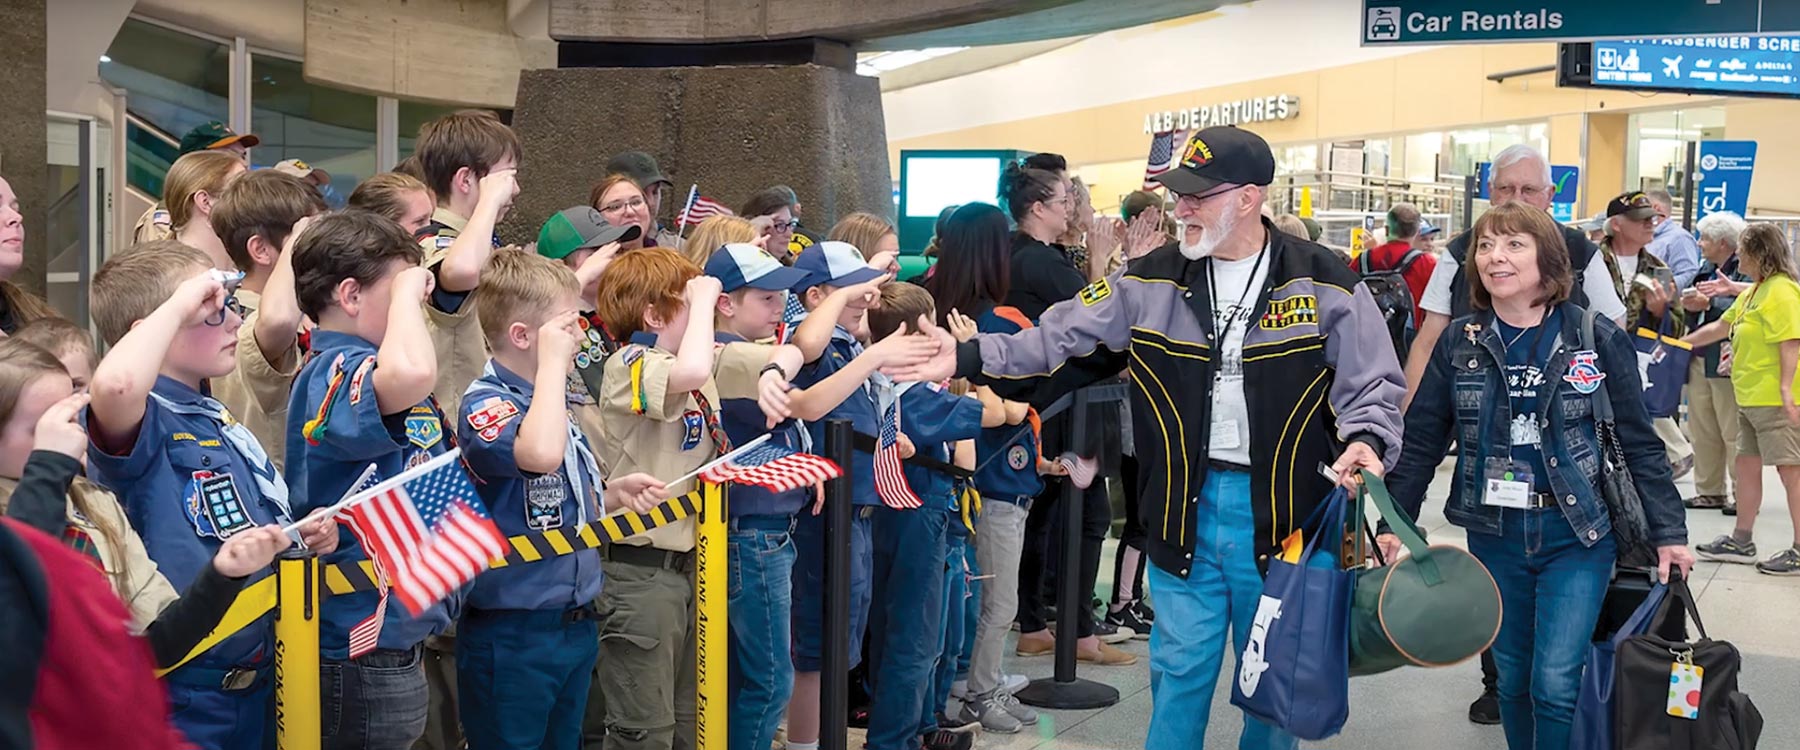 Boy Scouts enthusiastically welcome an elderly veteran at an airport, saluting and giving high-fives.